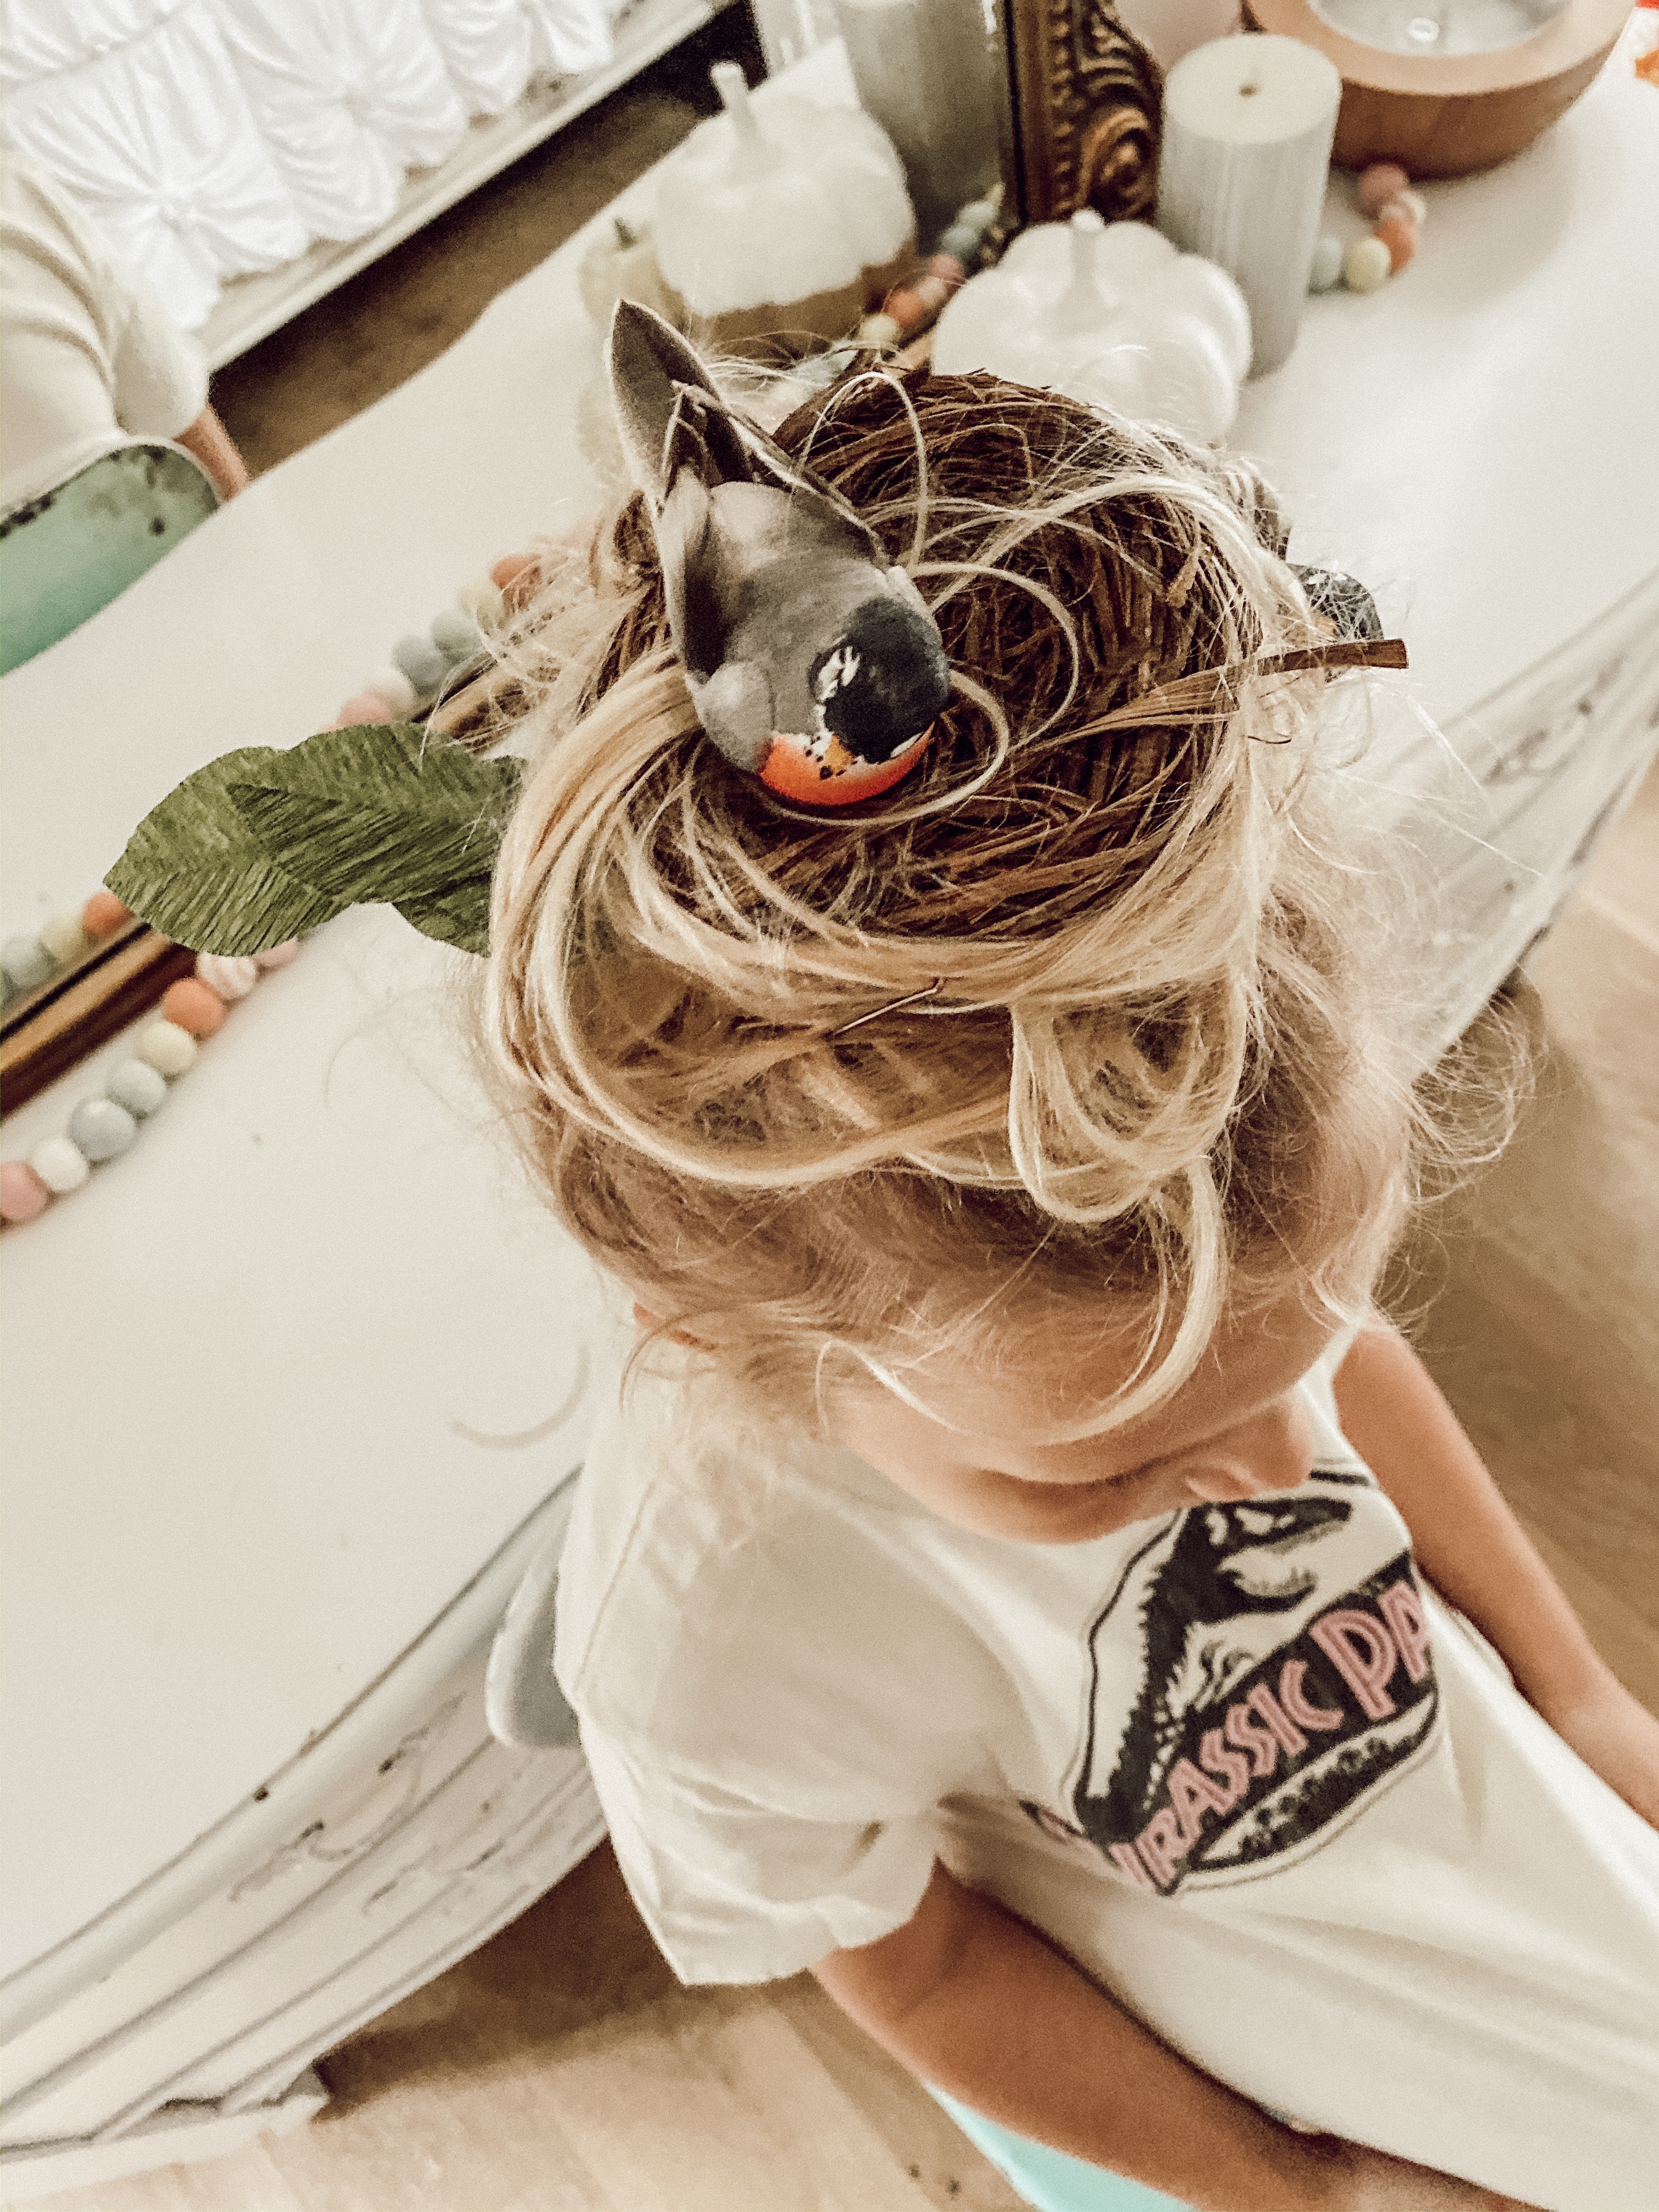 Crazy Hair Day: Cupcake Hair & more ideas - Casey Wiegand of The Wiegands